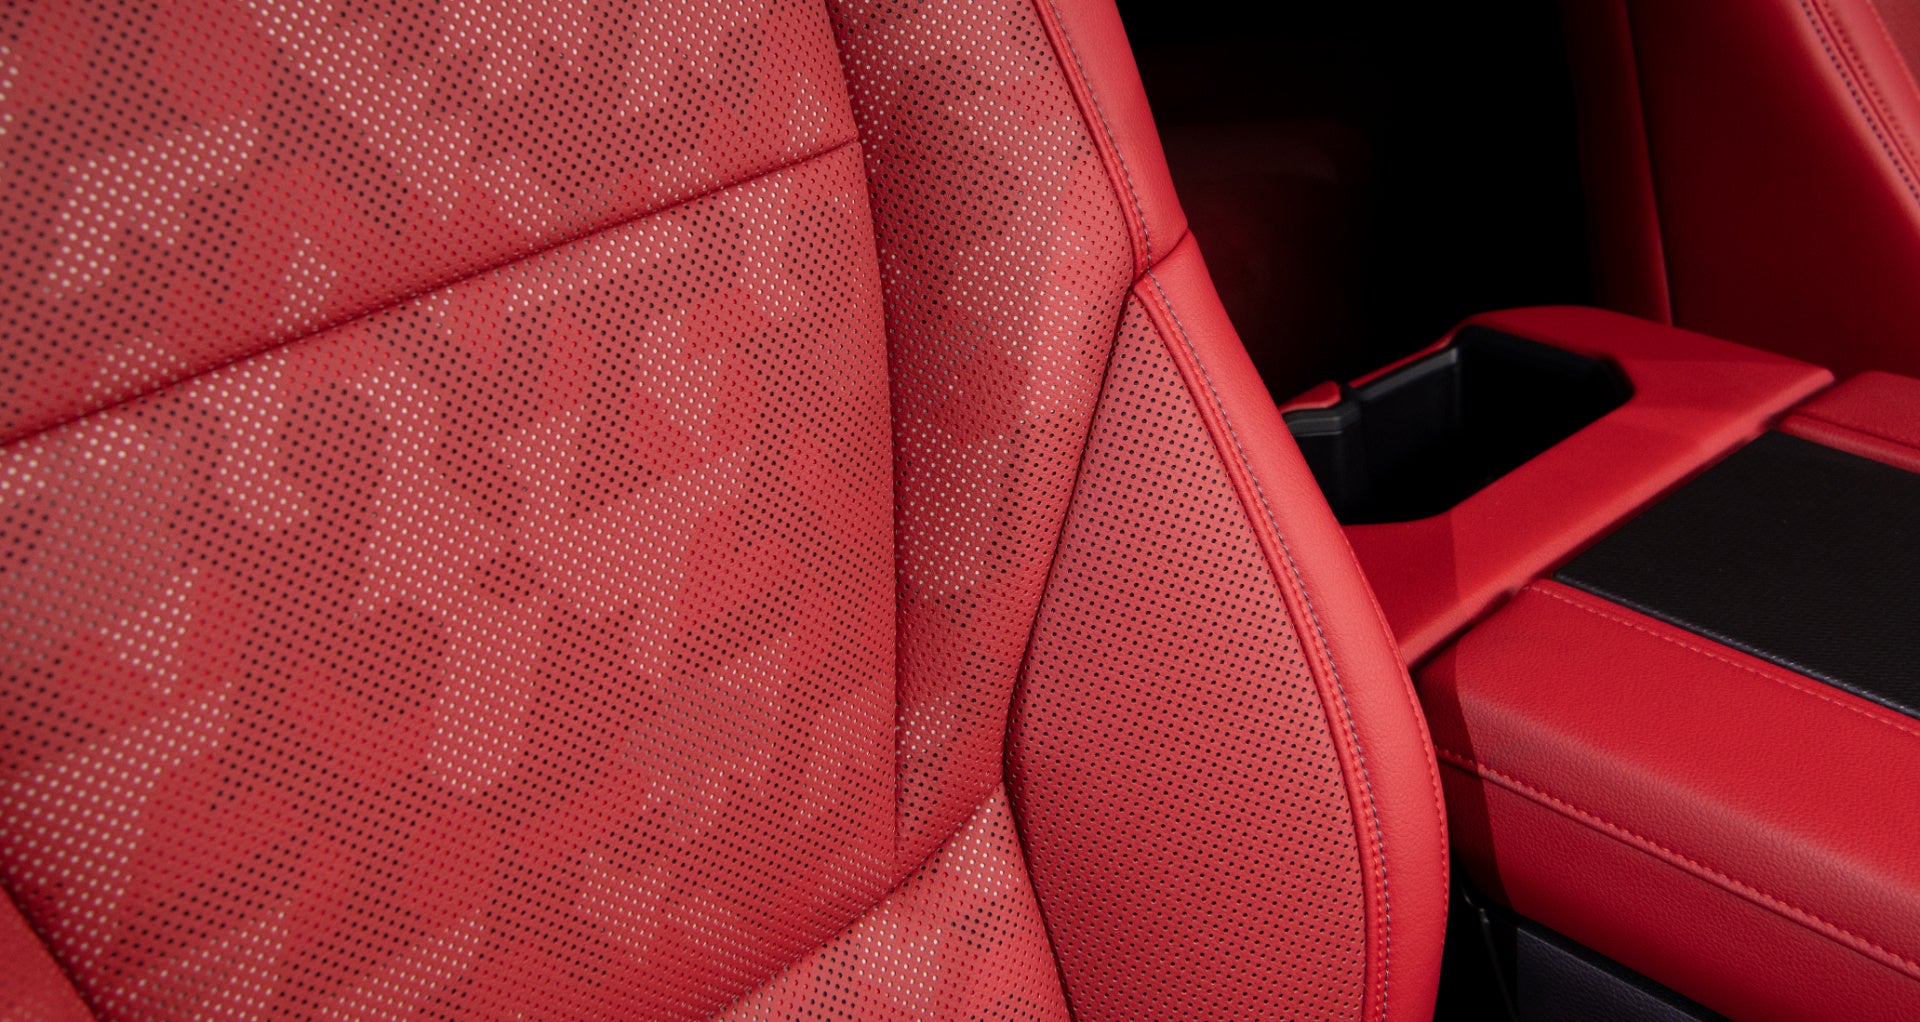 Technical Camo pattern in the TRD Pro seats, <i>Toyota</i>